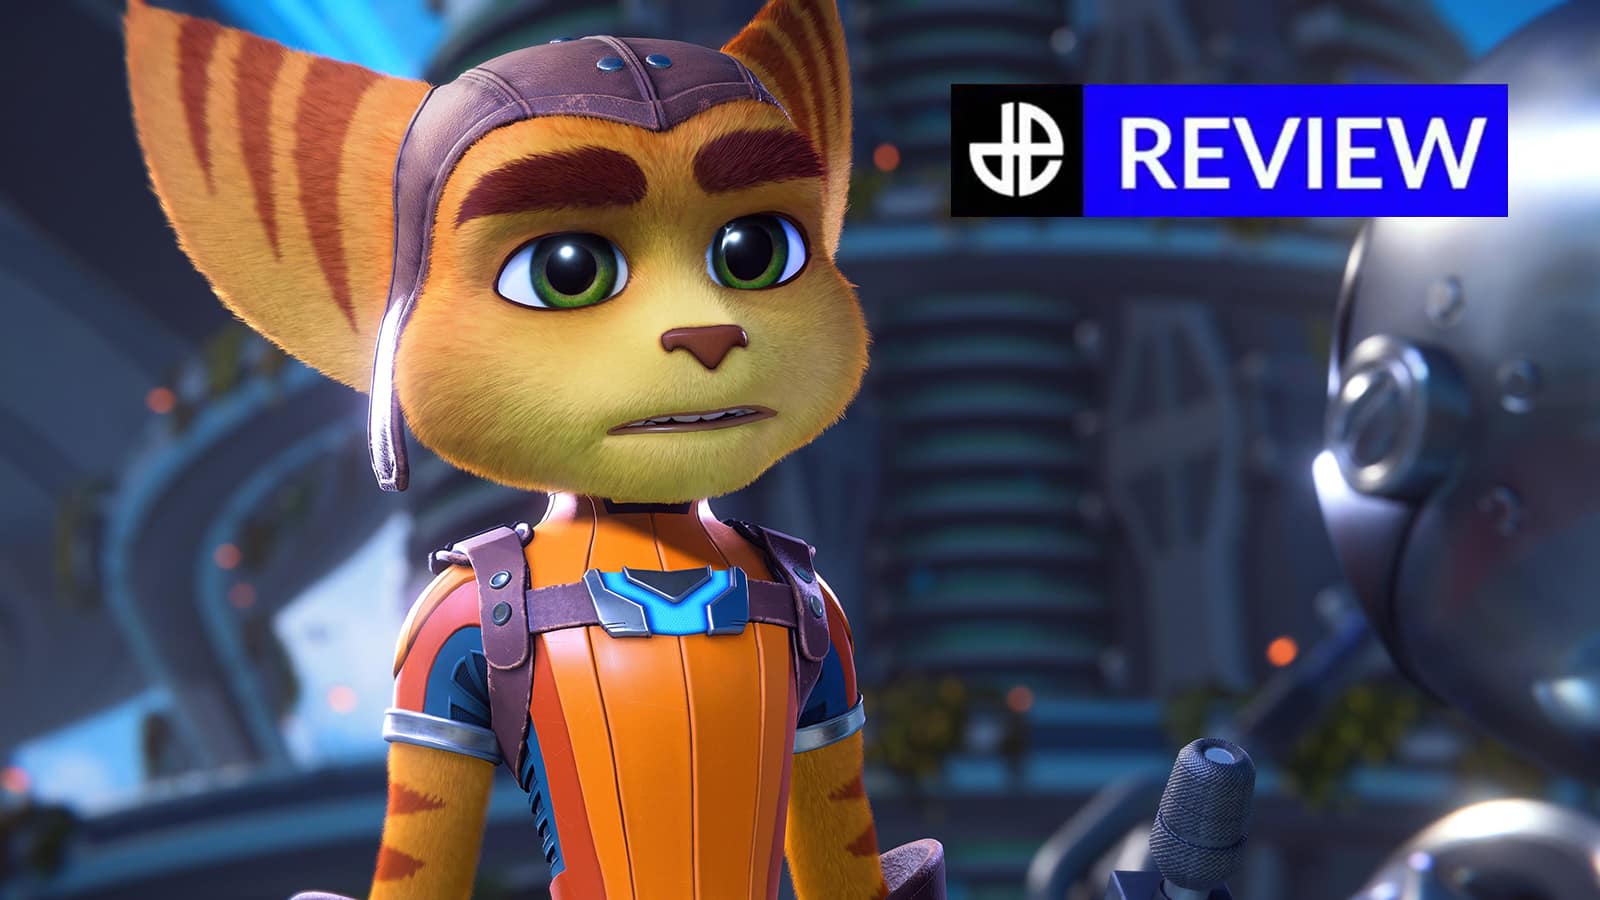 Ratchet & Clank Rift Apart PC Port Review – A Superb Way to Play the Game